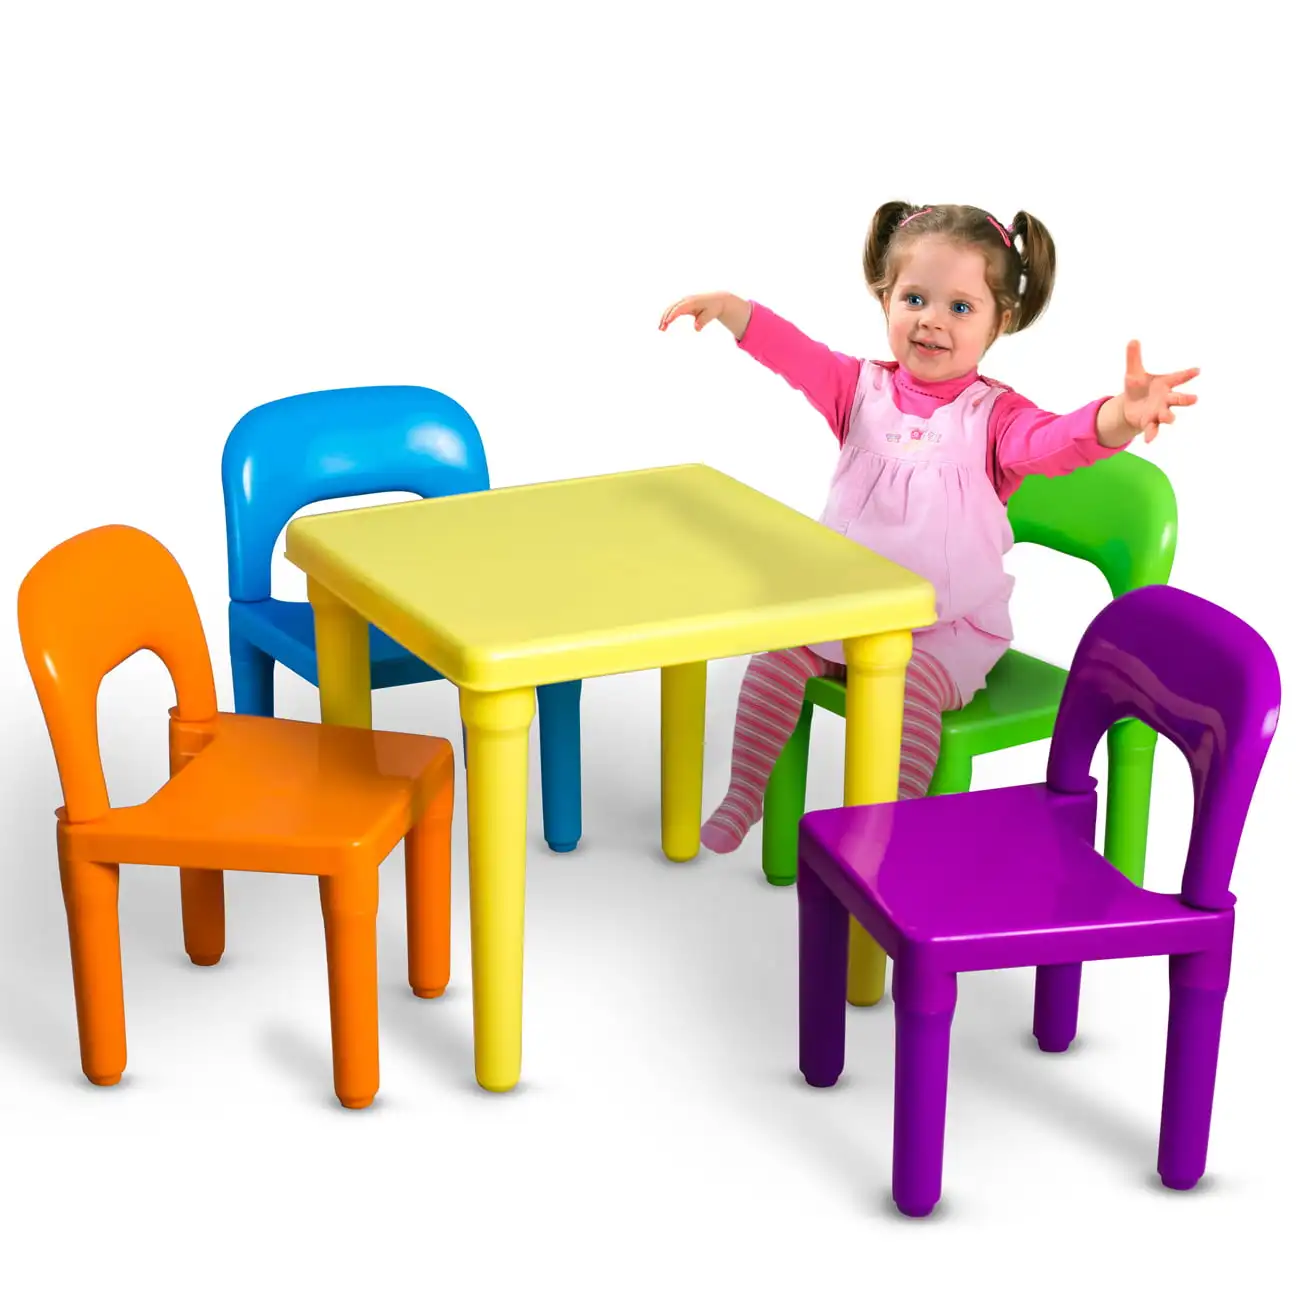 

Kids Table and Chairs Play Set Colorful Child Toy Activity Desk for Toddler Sturdy Plastic